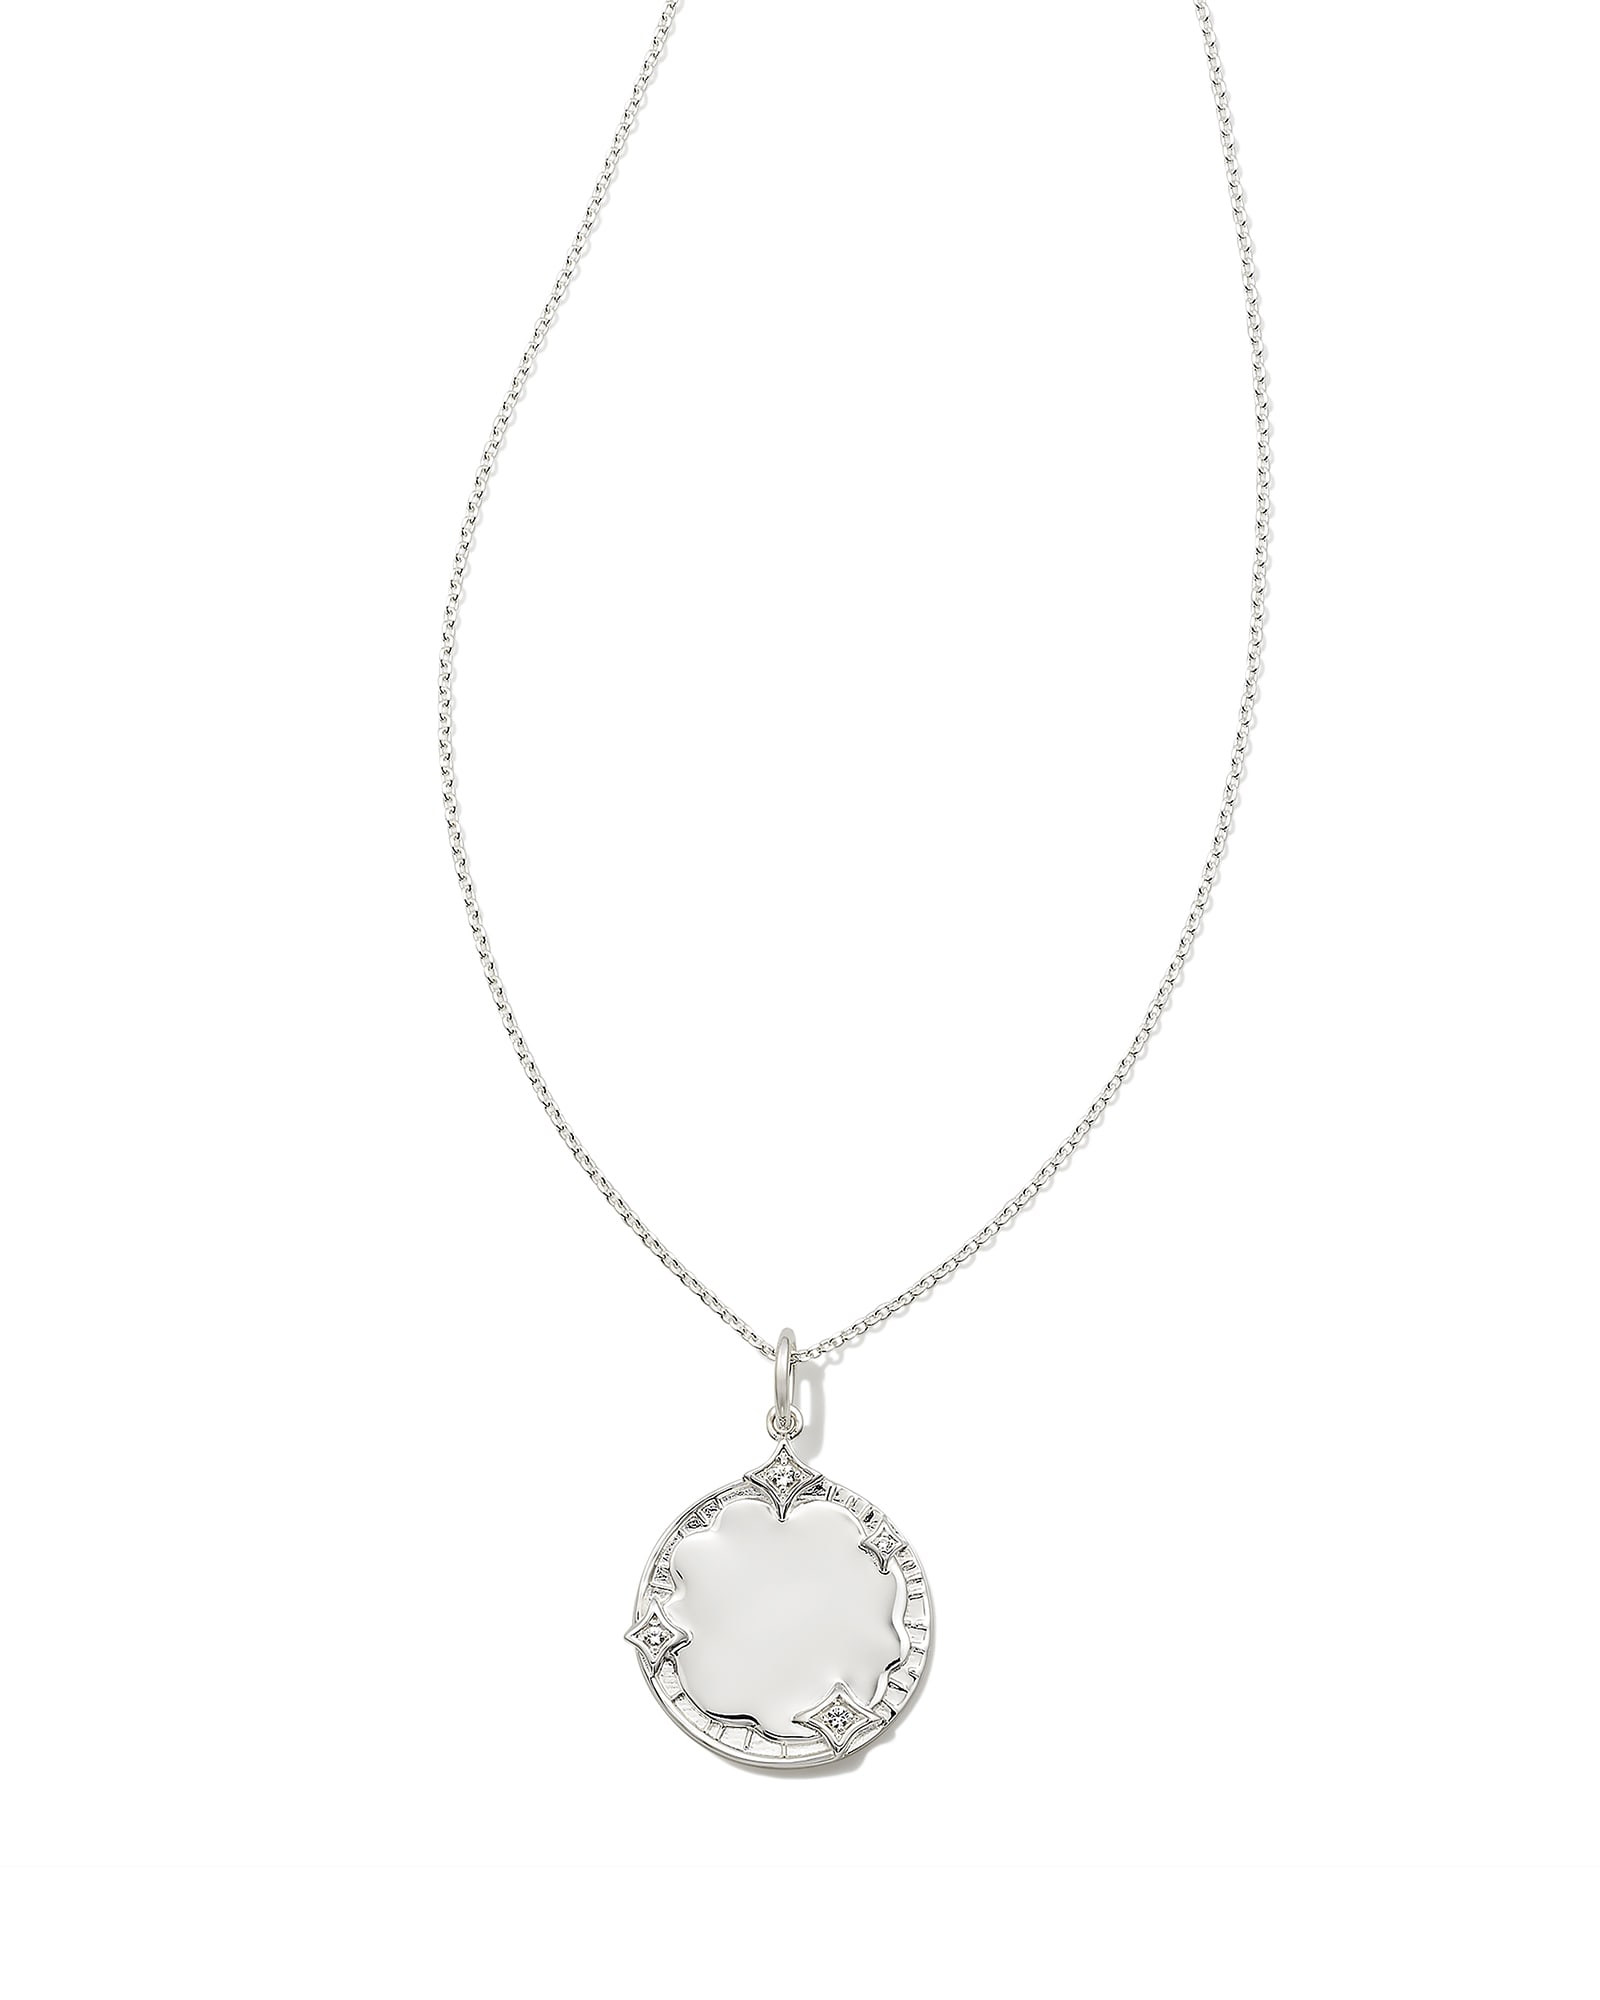 Luna Sterling Silver Charm Necklace in White Sapphire